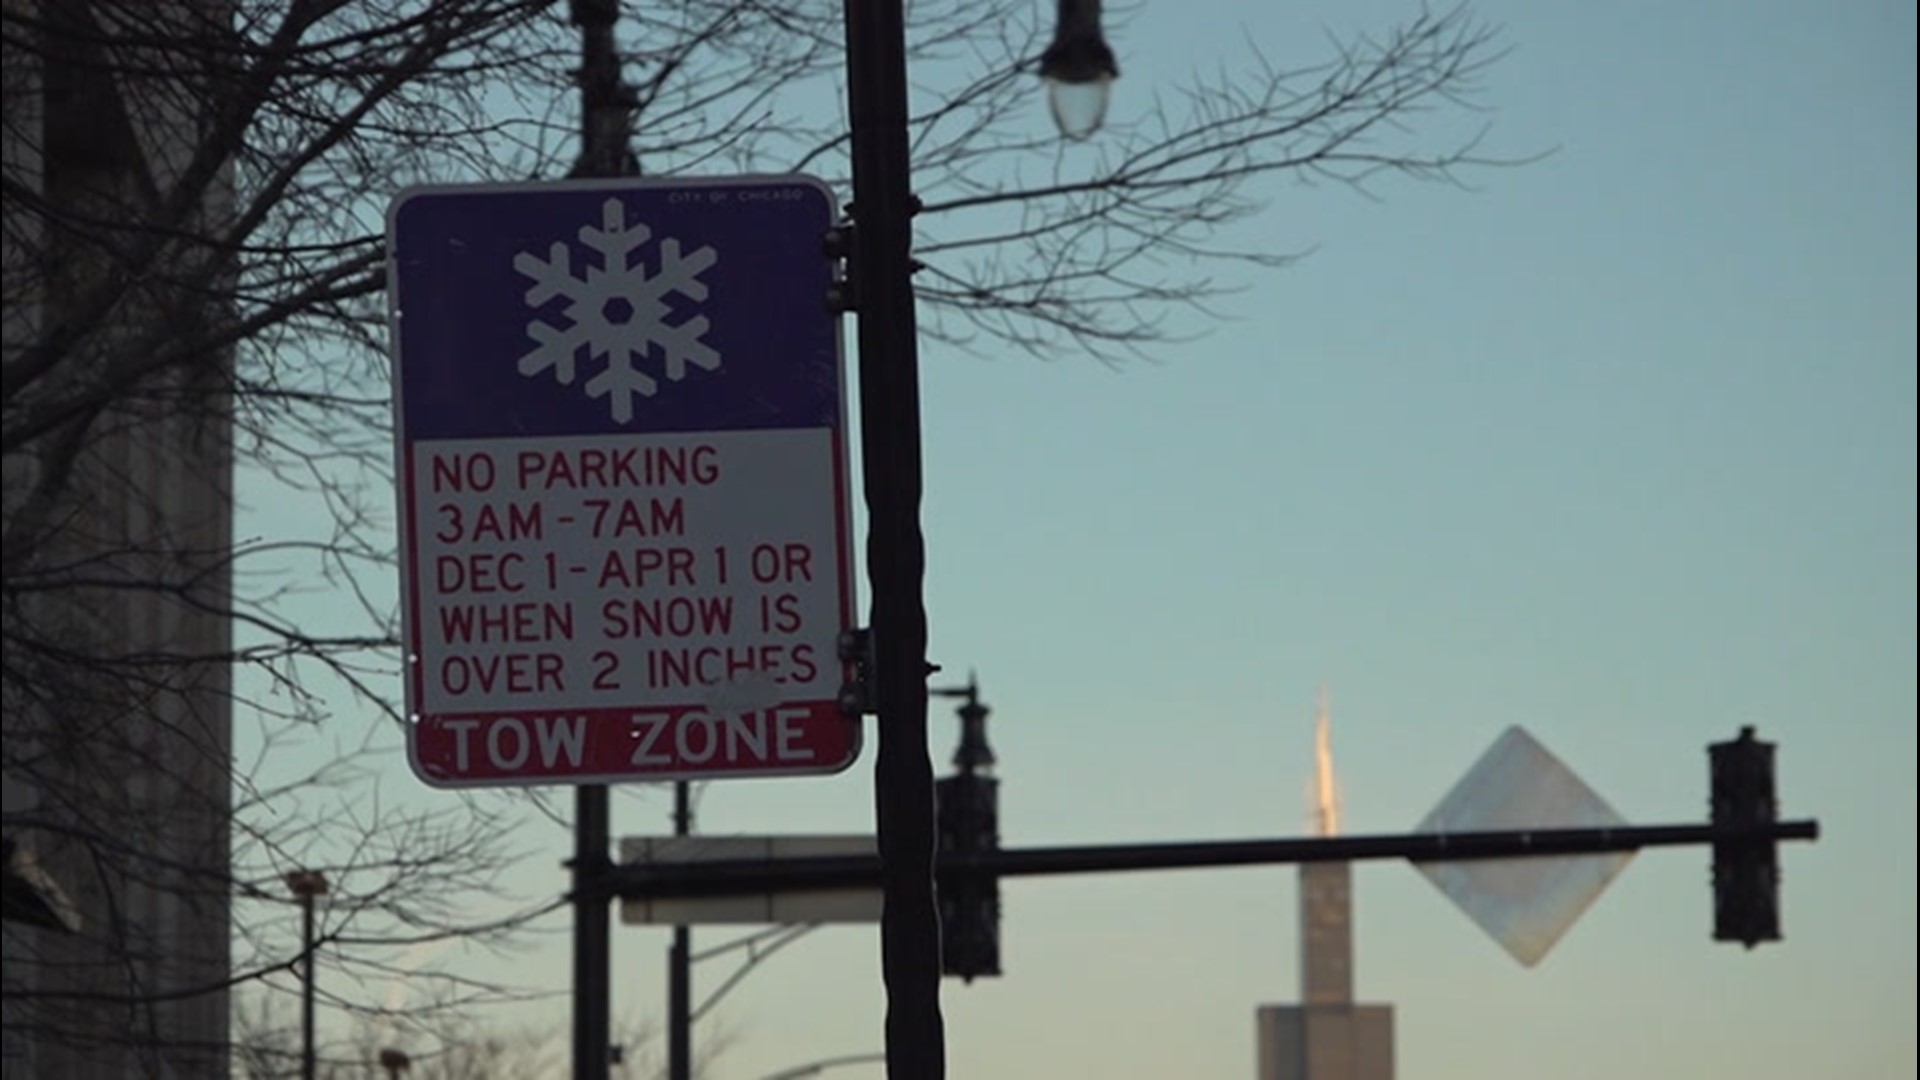 Winter parking rules begin in Illinois and Wisconsin as the season starts.